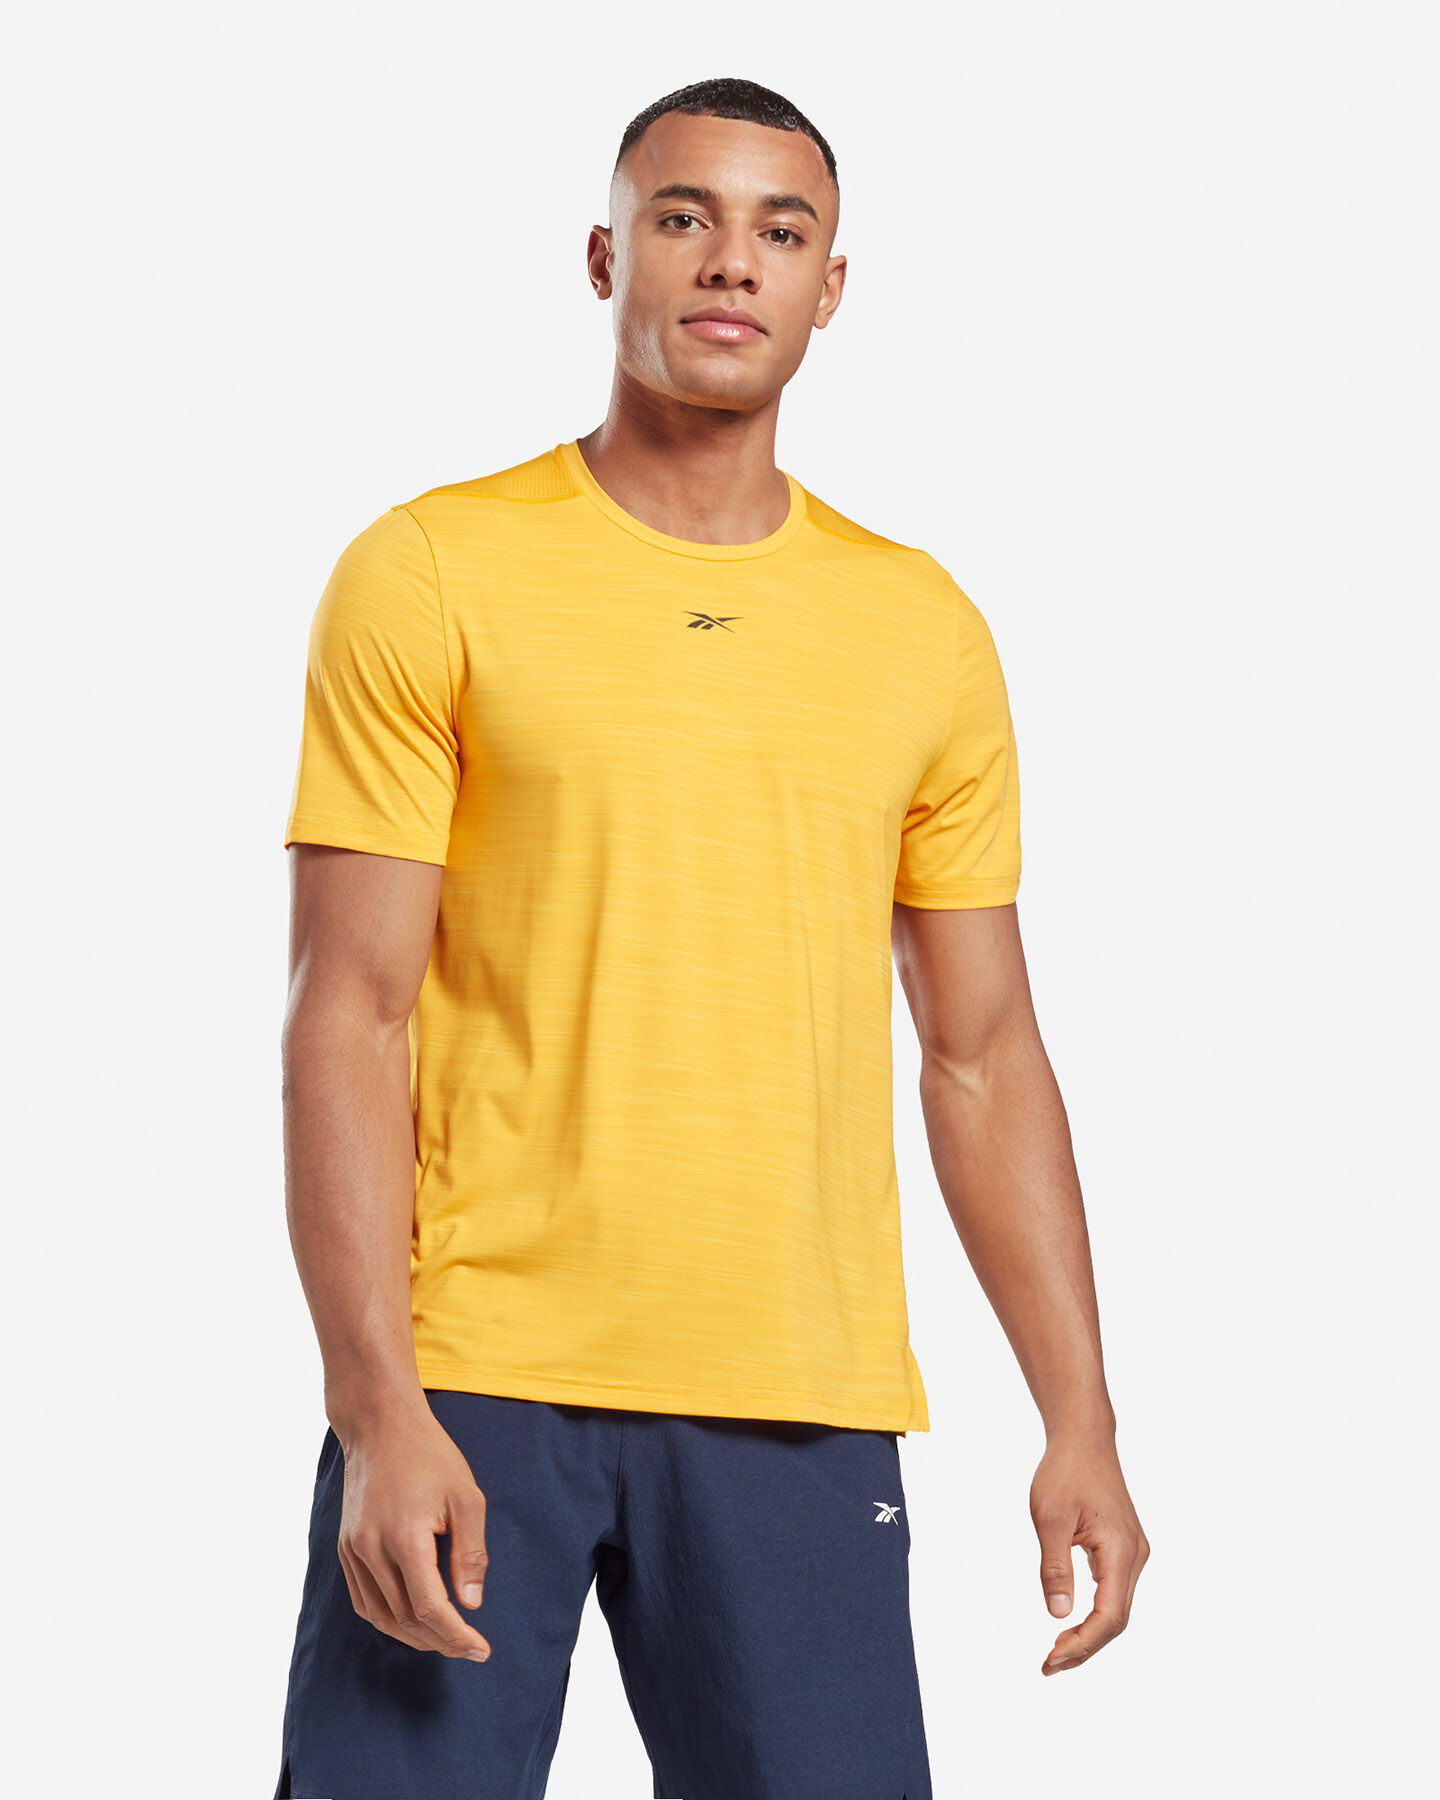  T-Shirt training REEBOK AC SOLID MOVE M S5326703|UNI|S scatto 1